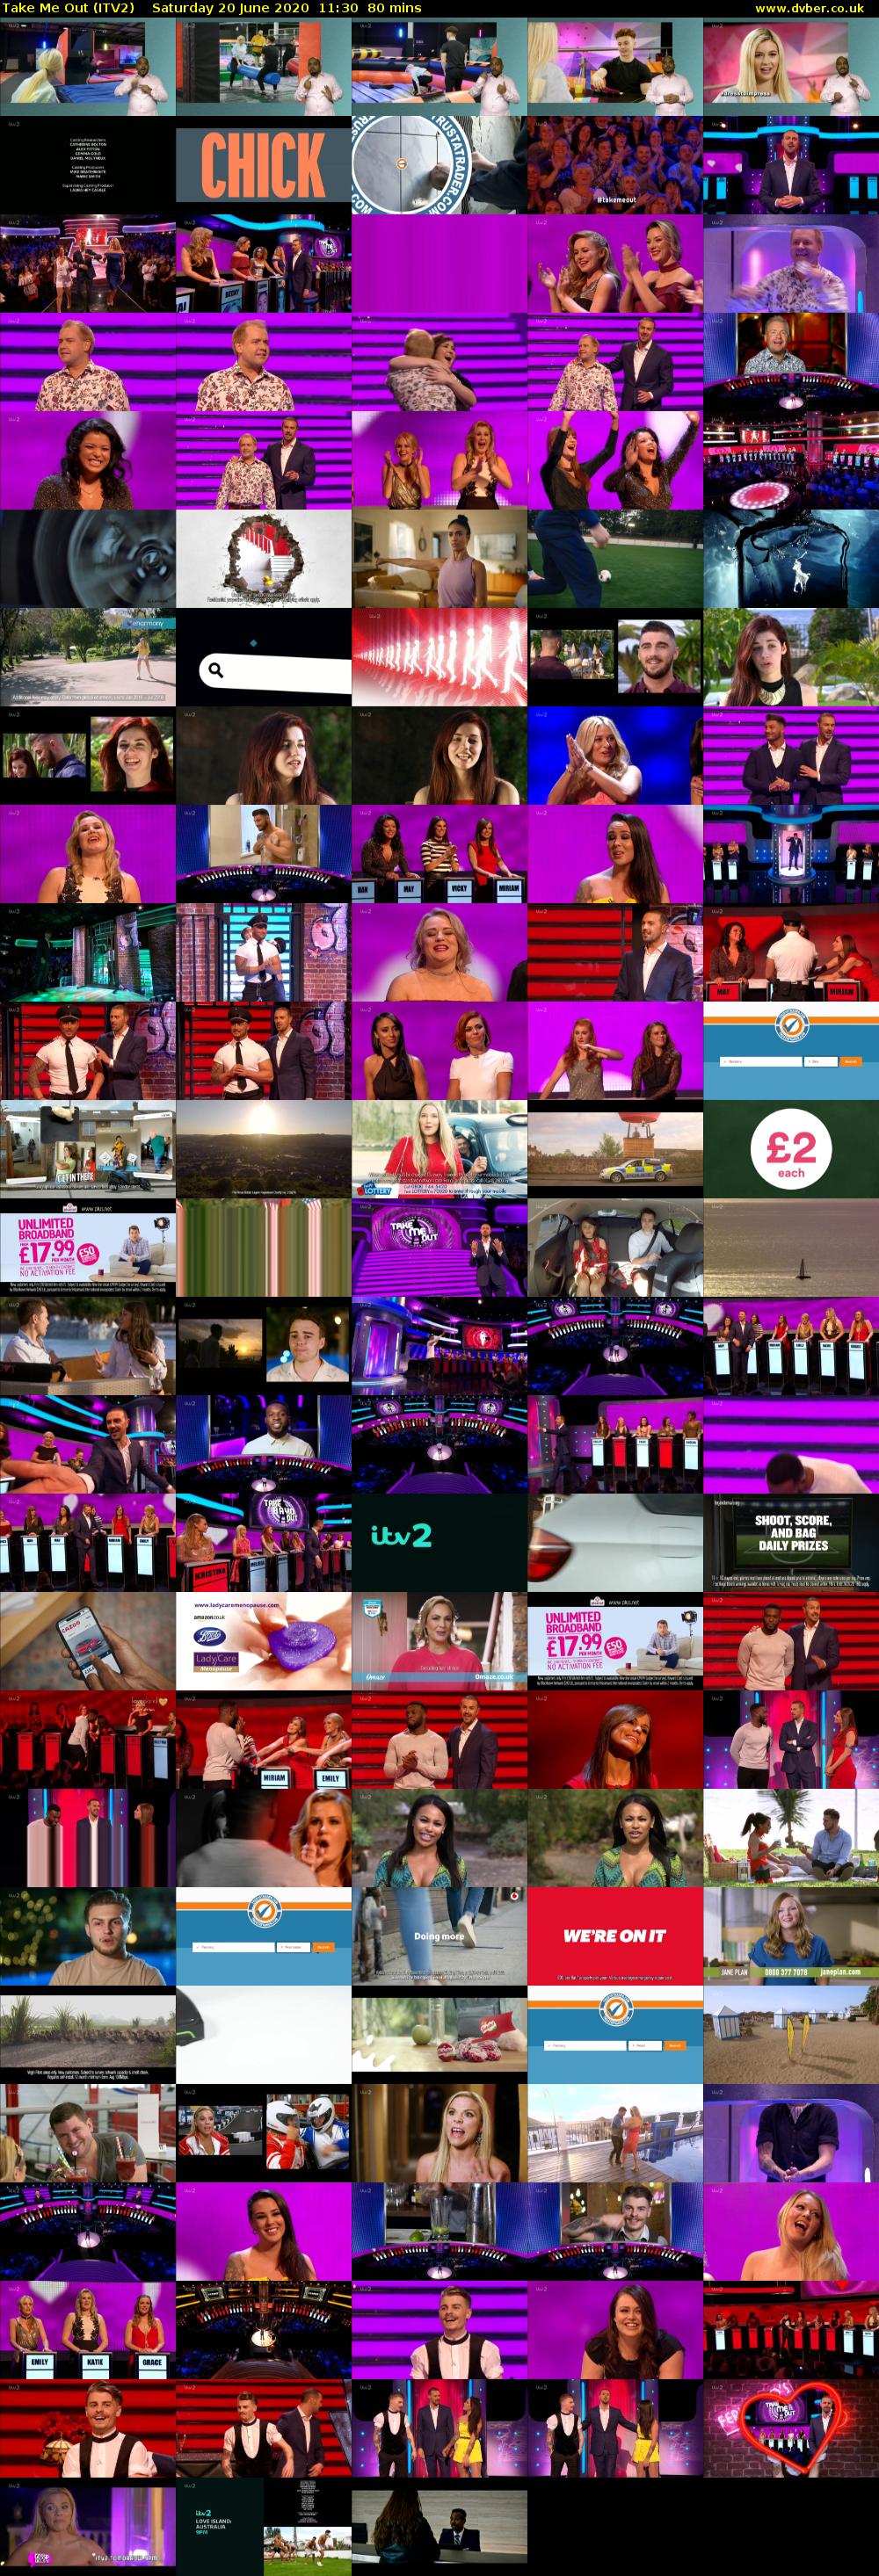 Take Me Out (ITV2) Saturday 20 June 2020 11:30 - 12:50